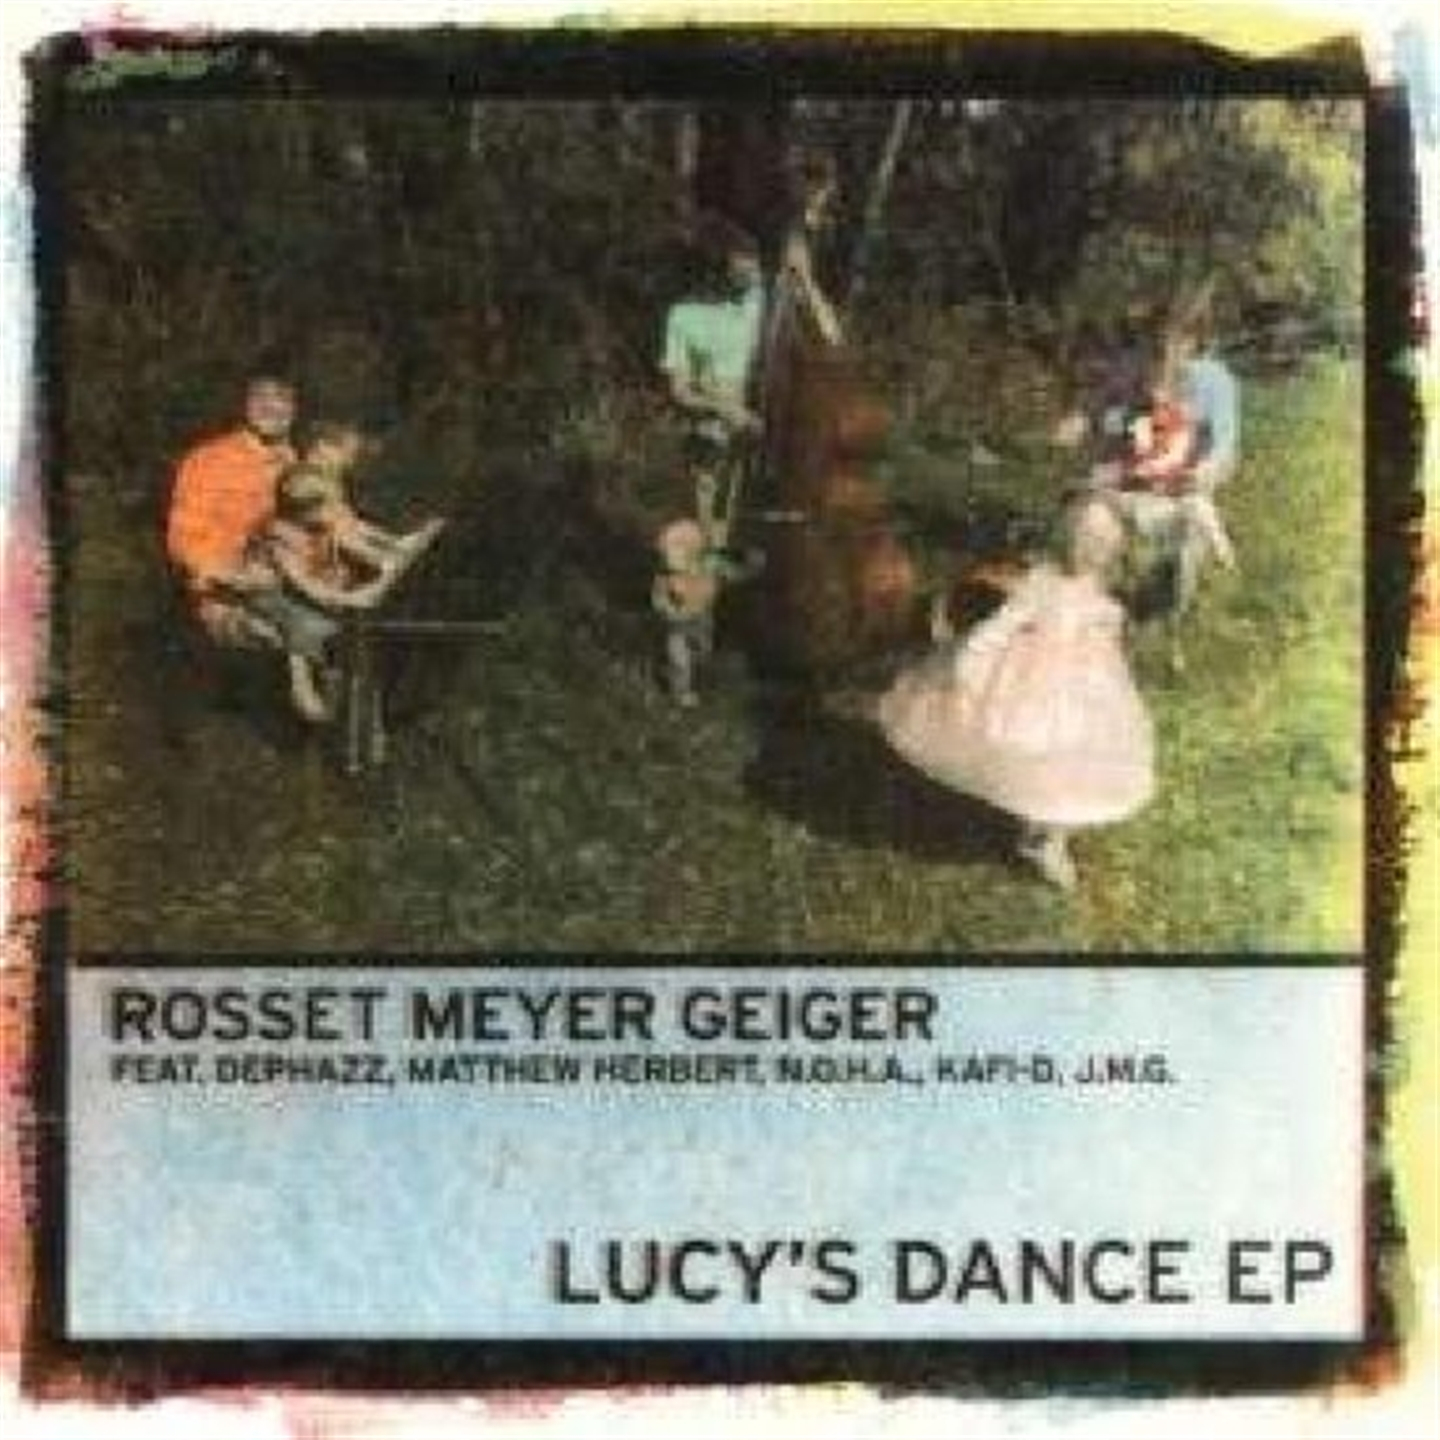 LUCY'S DANCE (EP)